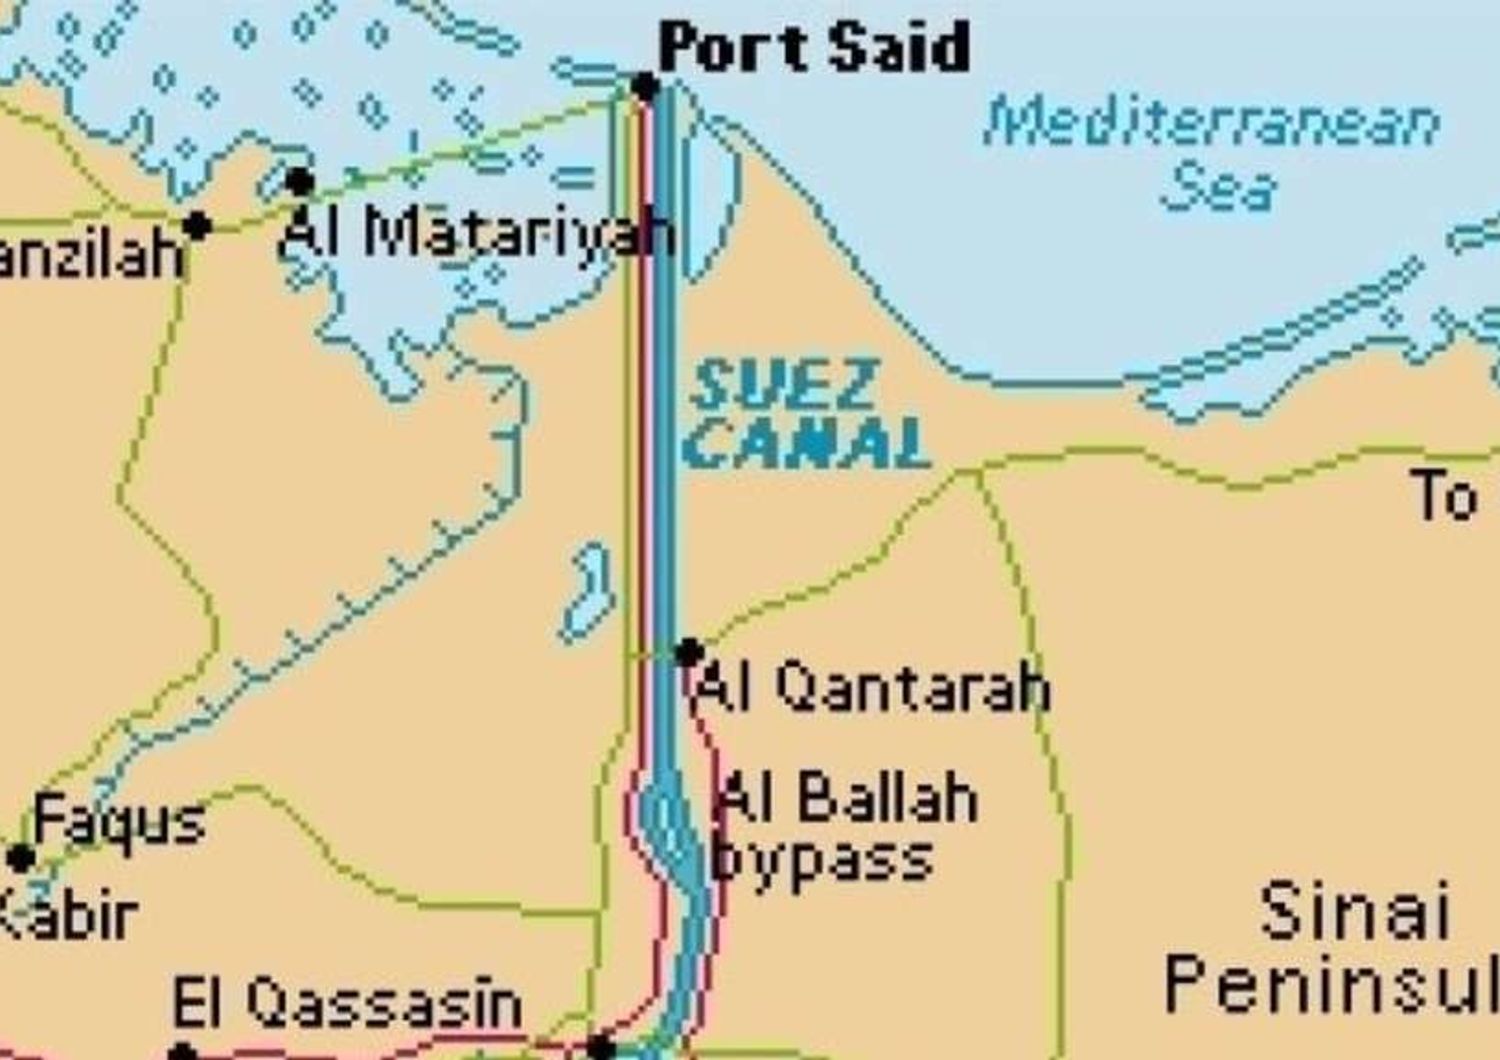 Italian companies eager to invest in Suez Canal project